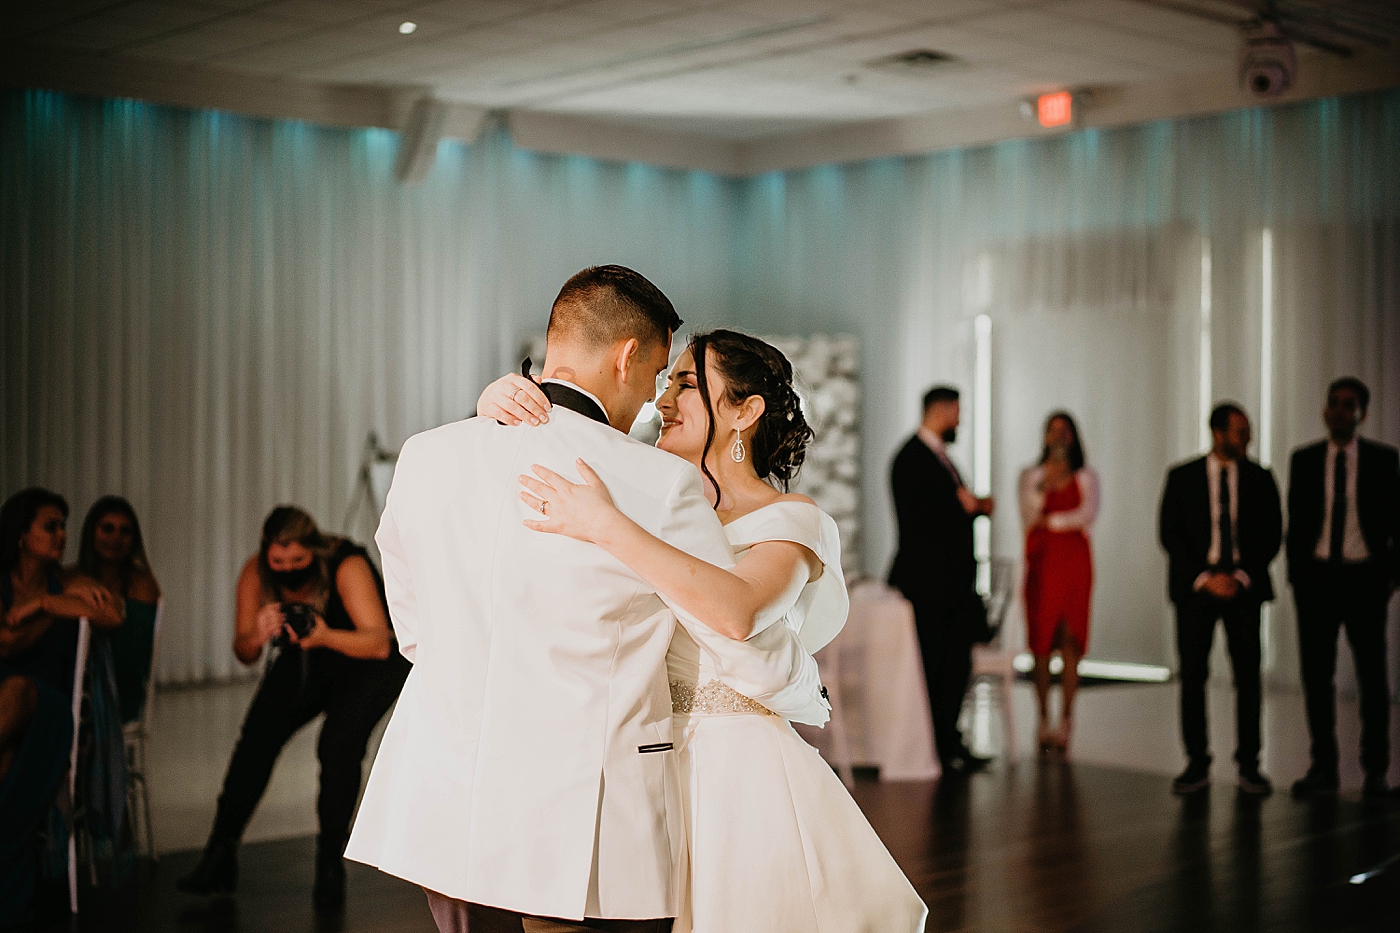 Bride and Groom first dance Reception Lavan Venue Wedding Photography captured by South Florida Wedding Photographer Krystal Capone PhotographyLavan Venue Wedding Photography captured by South Florida Wedding Photographer Krystal Capone Photography